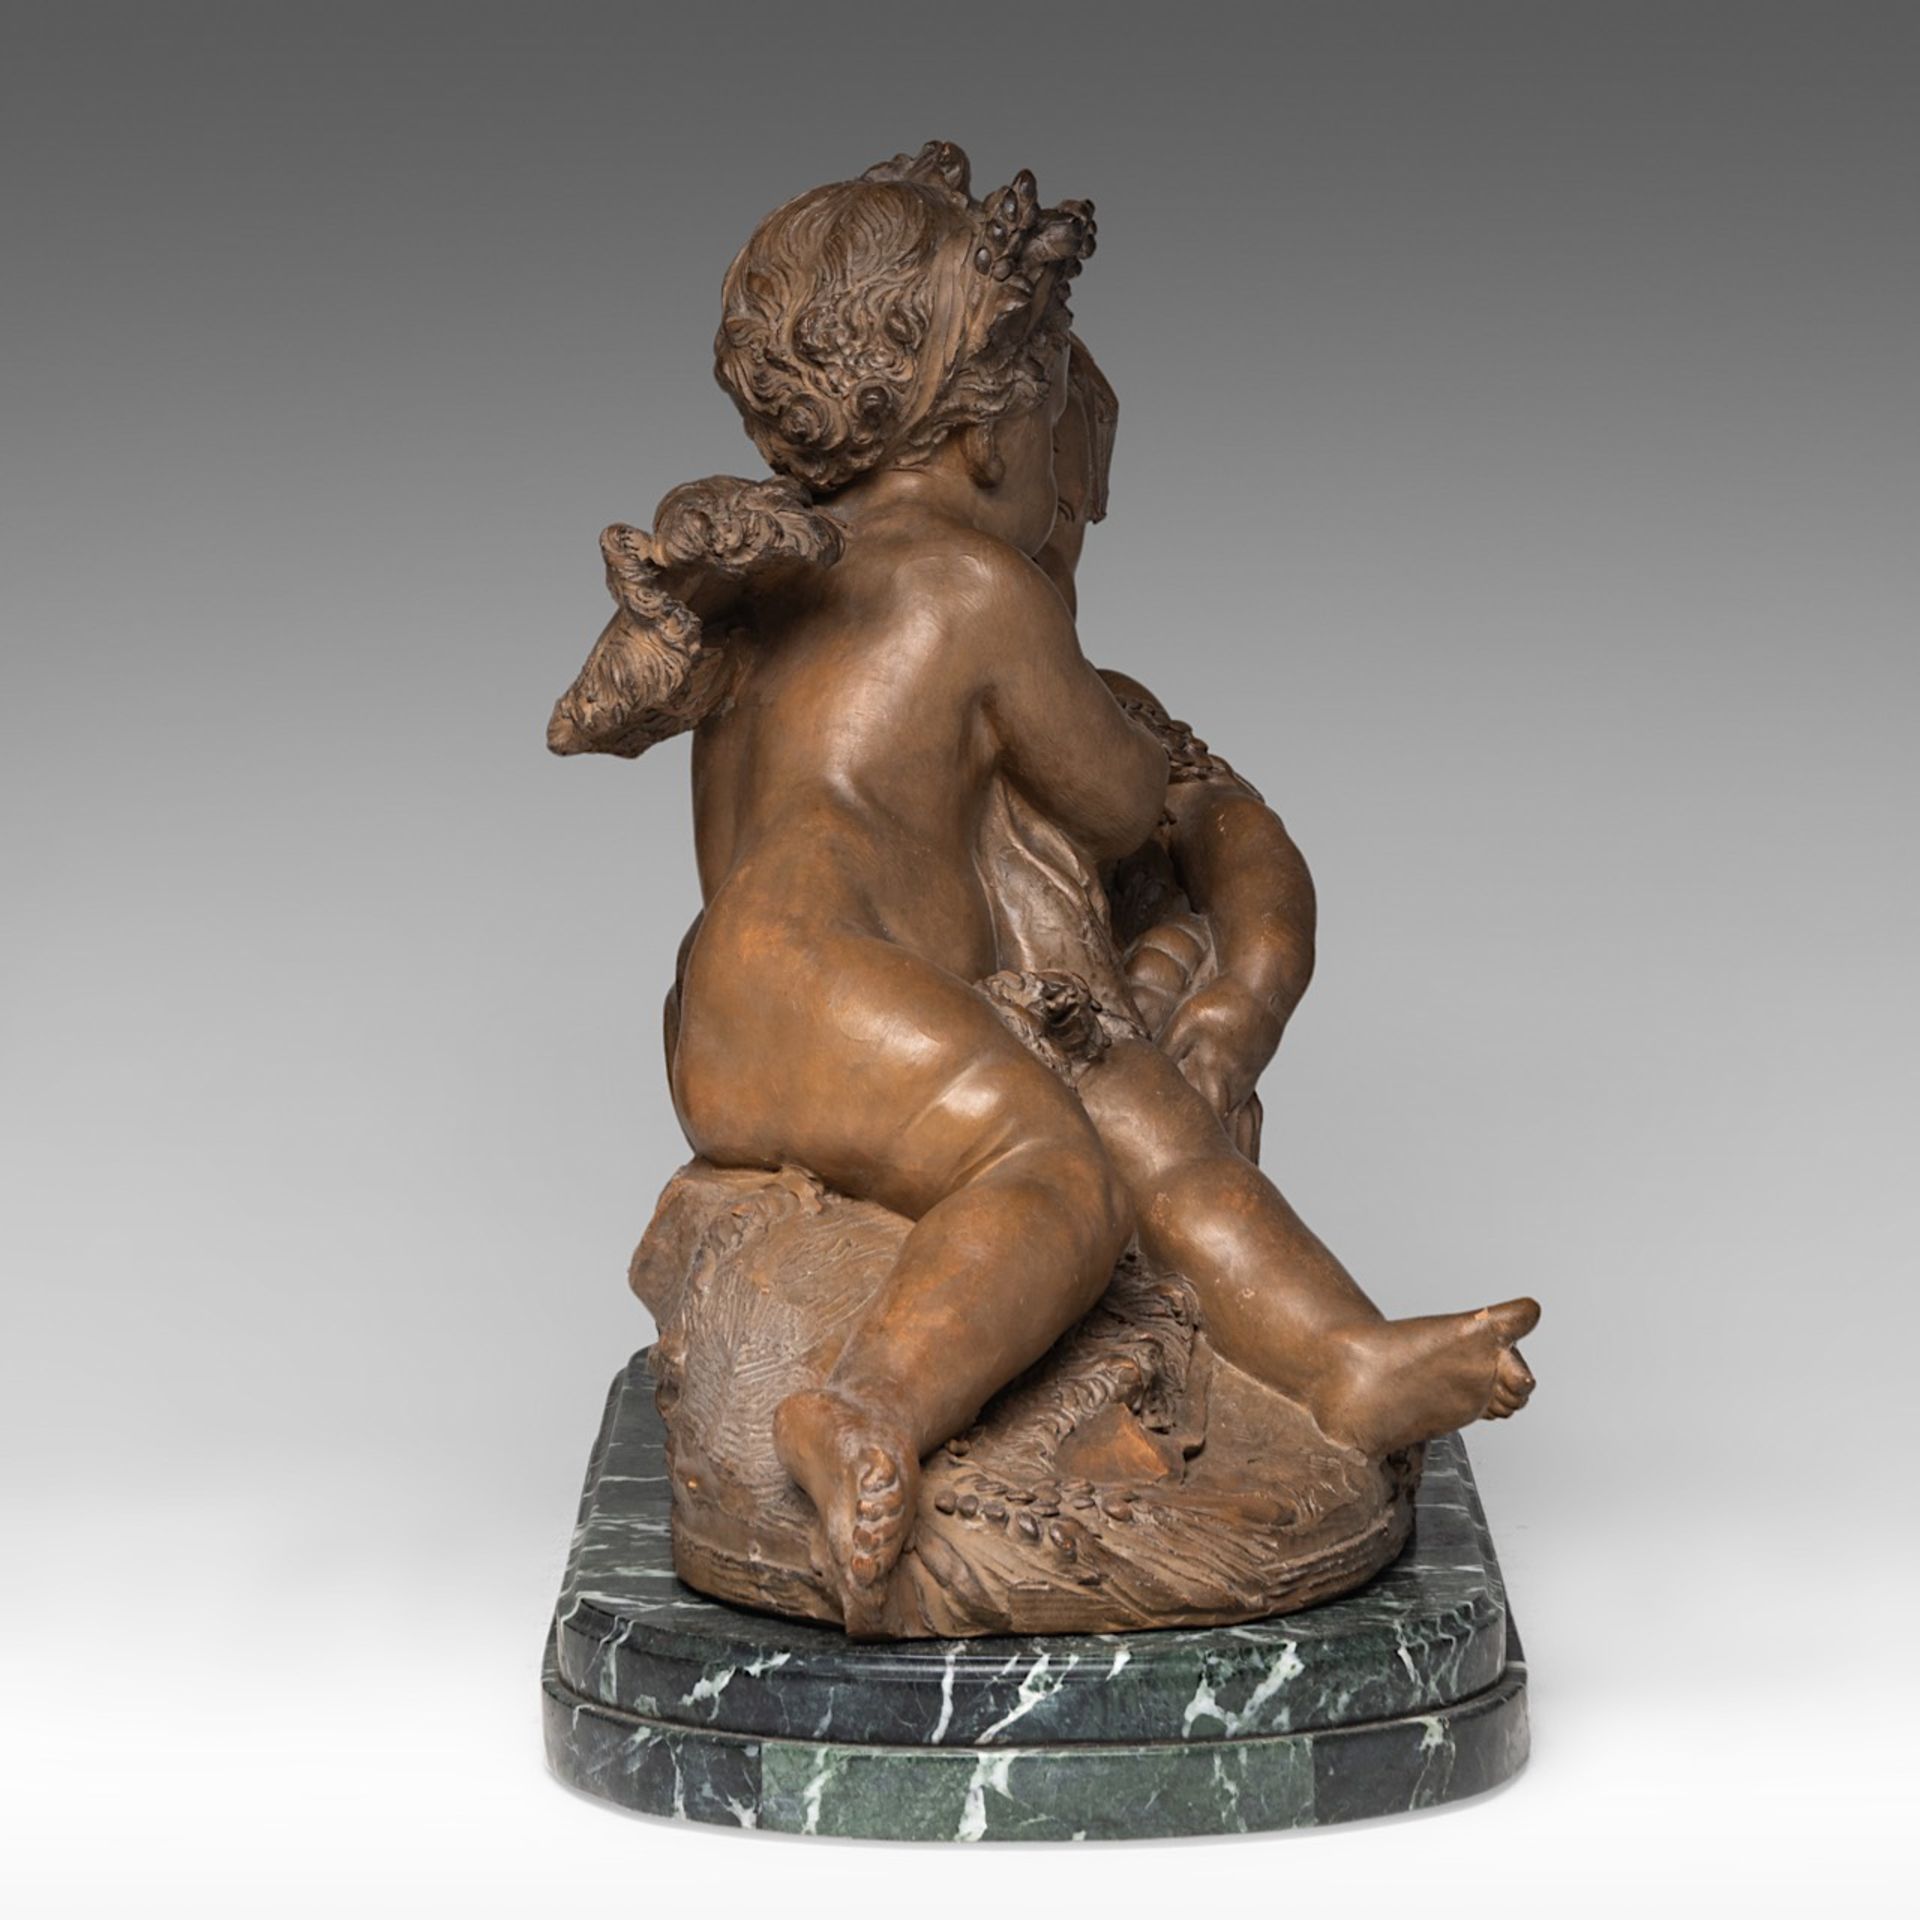 Carrier-Belleuse (1824-1887), two putti by the fountain, terracotta on a marble base, H 43 - W 68 cm - Bild 7 aus 10